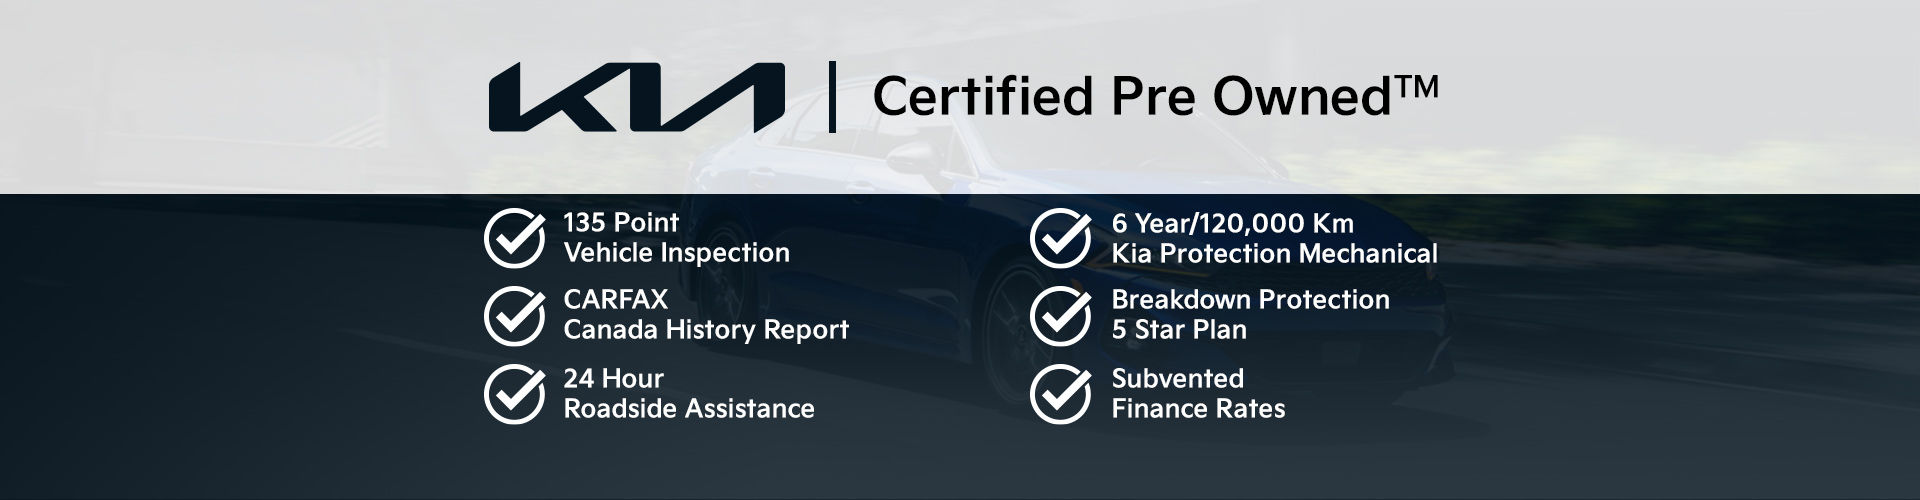 Certified-Pre-Owned